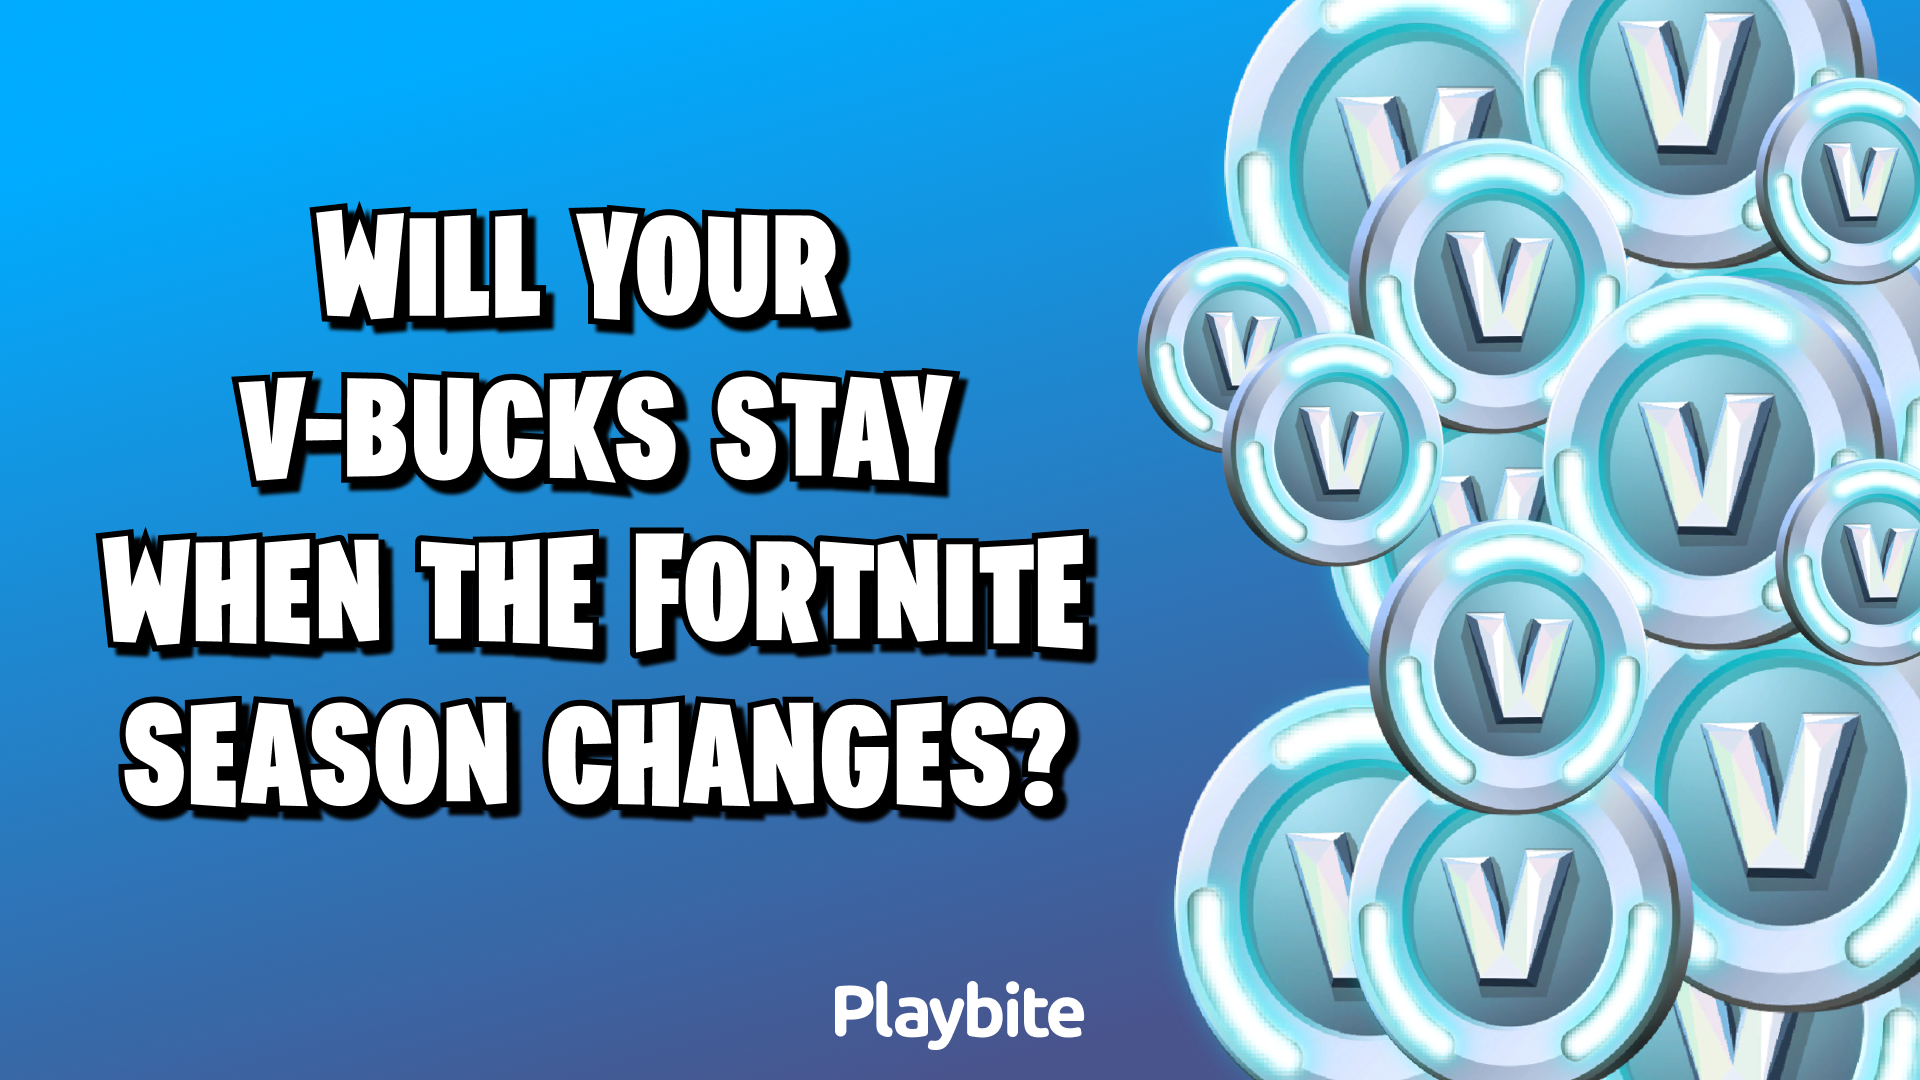 Will Your VBucks Stay When the Fortnite Season Changes?